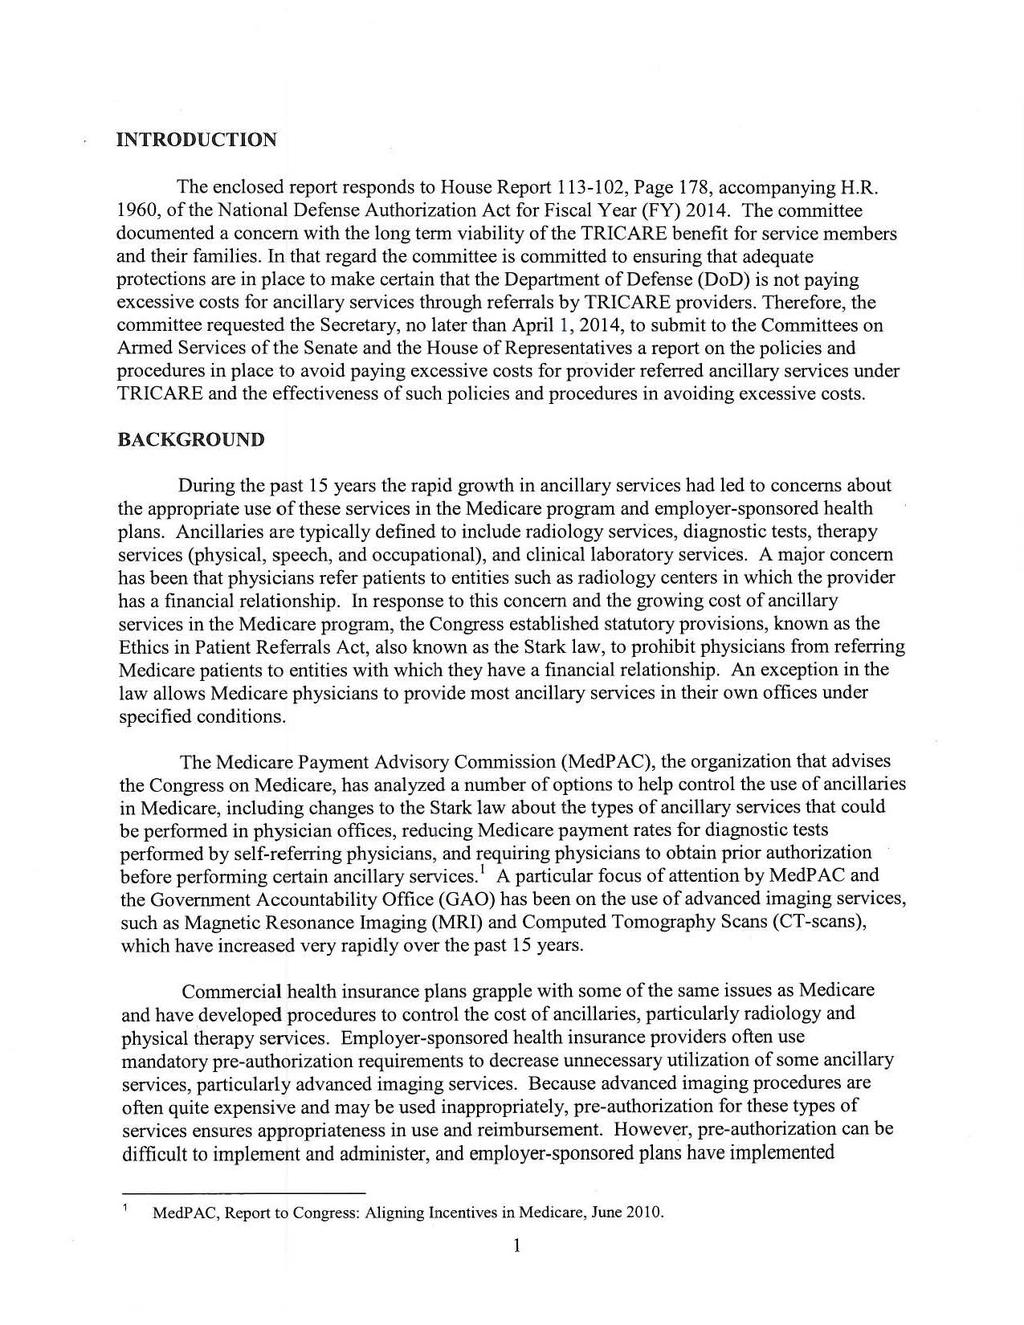 INTRODUCTION The enclosed report responds to House Report 113-102, Page 178, accompanying H.R. 1960, of the National Defense Authorization Act for Fiscal Year (FY) 2014.